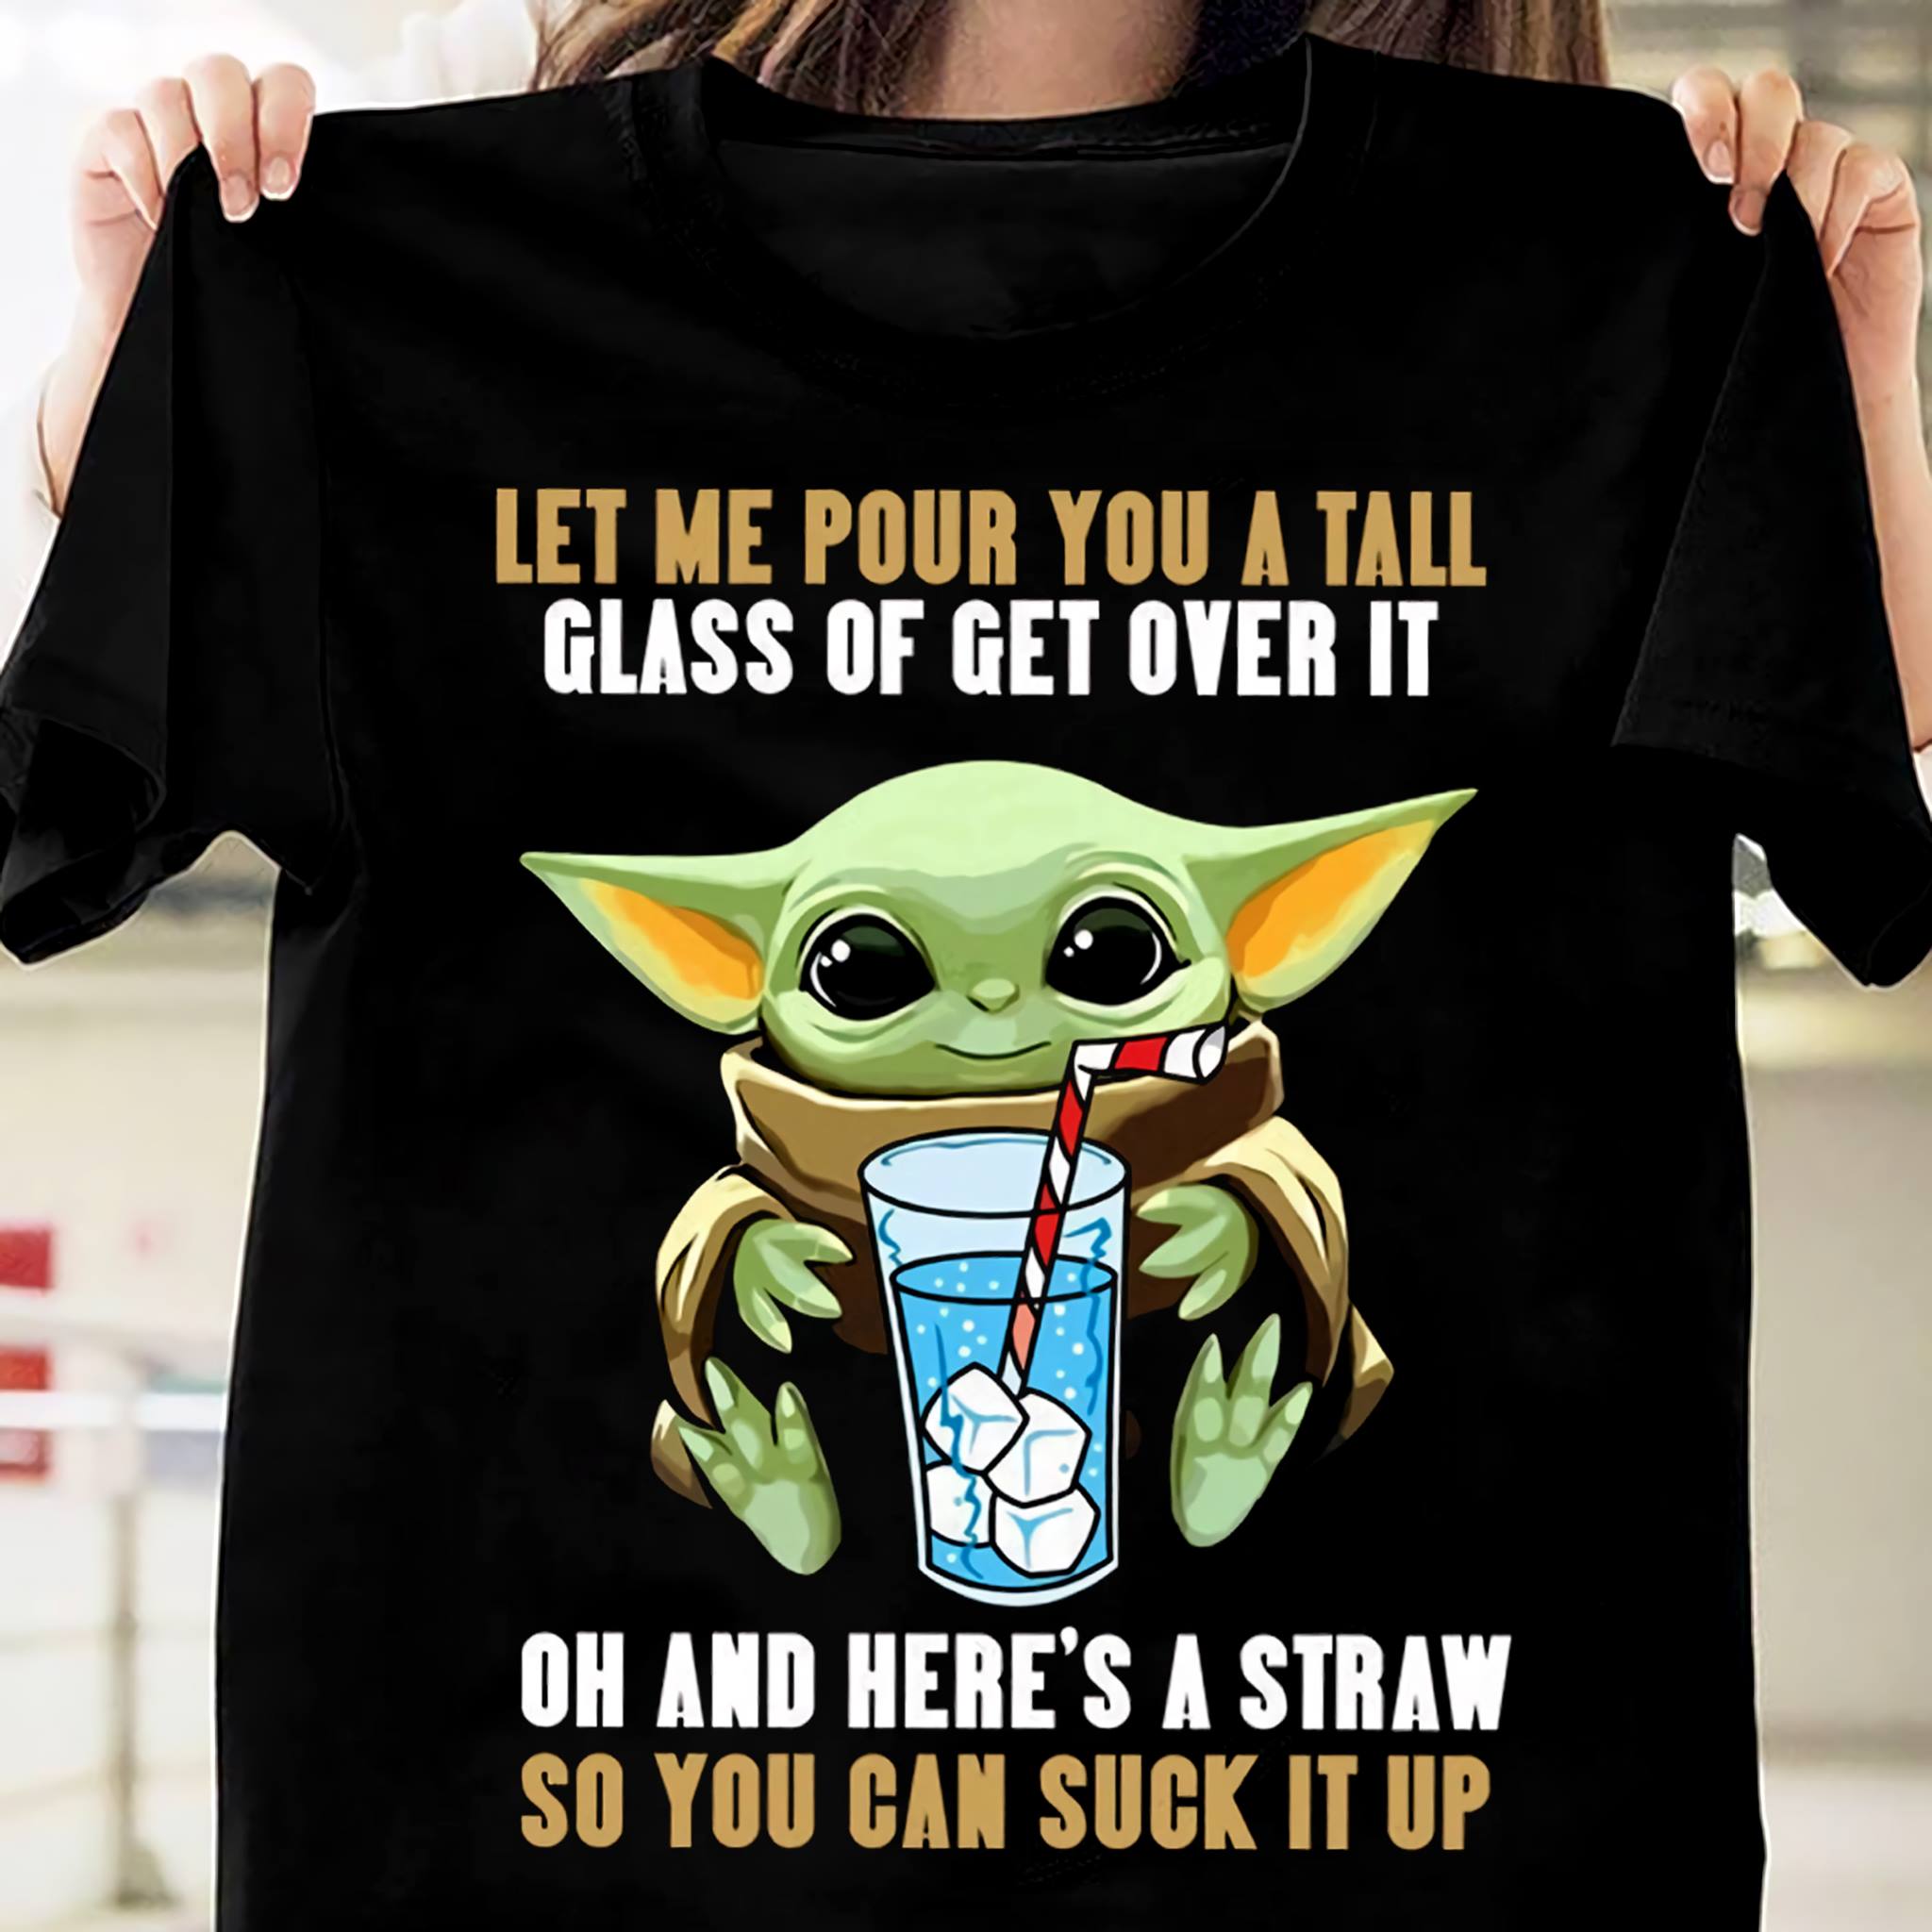 Let me pour you a tall glass of get over it - Yoda and glass of